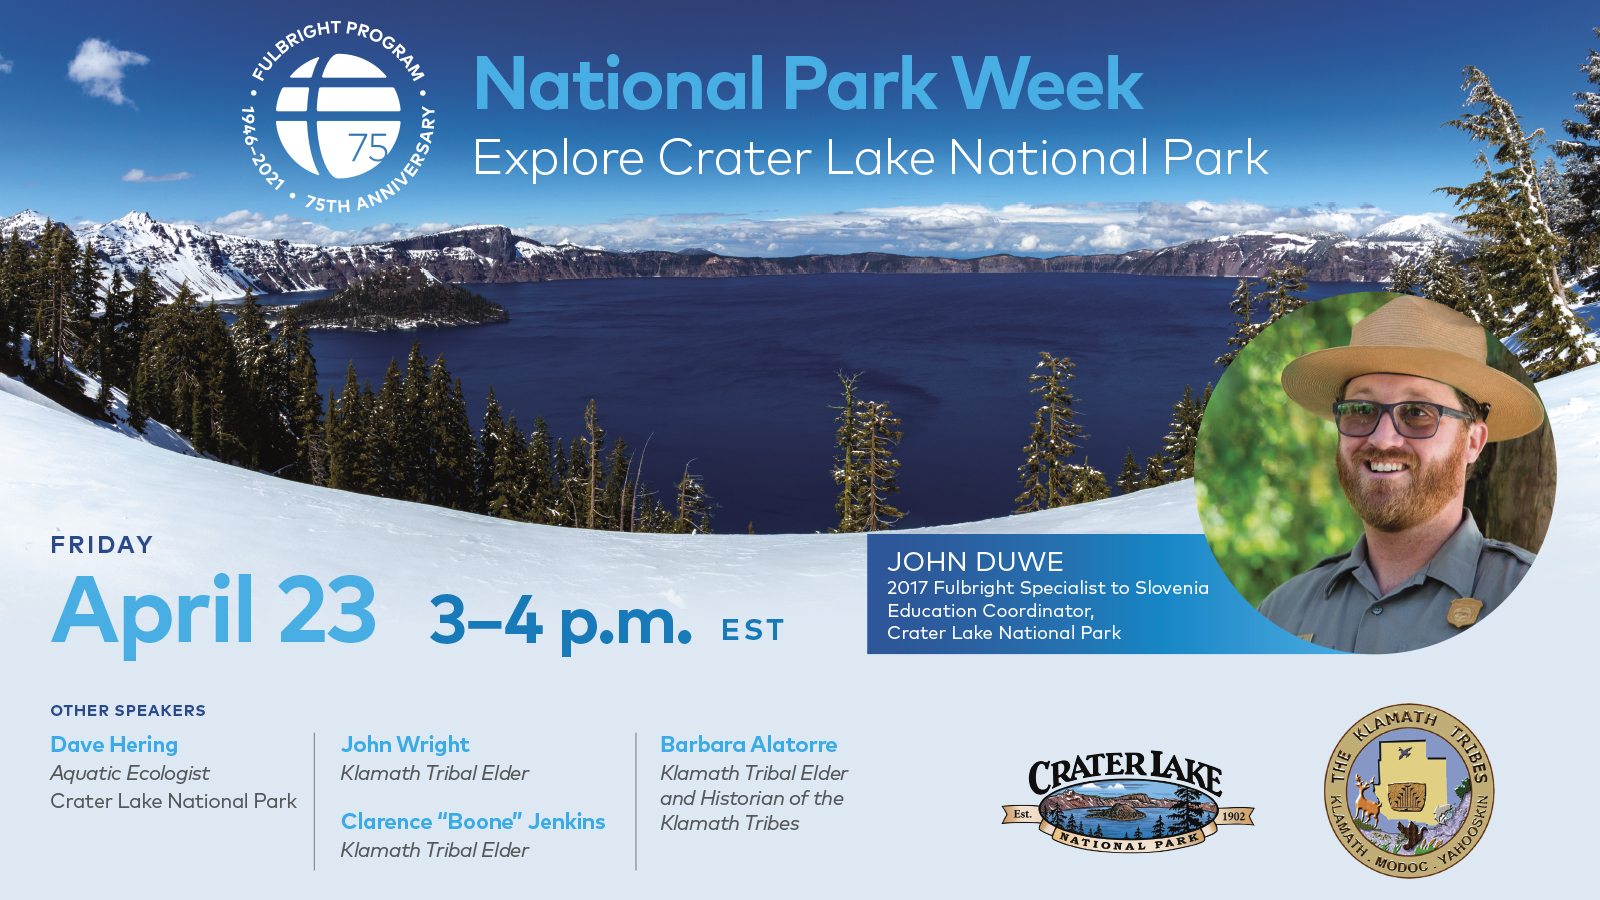 An advertisement for the "Explore Crater Lake National Park" event that takes place on April 23, 2021 from 3:00 pm to 4:00 pm EST.